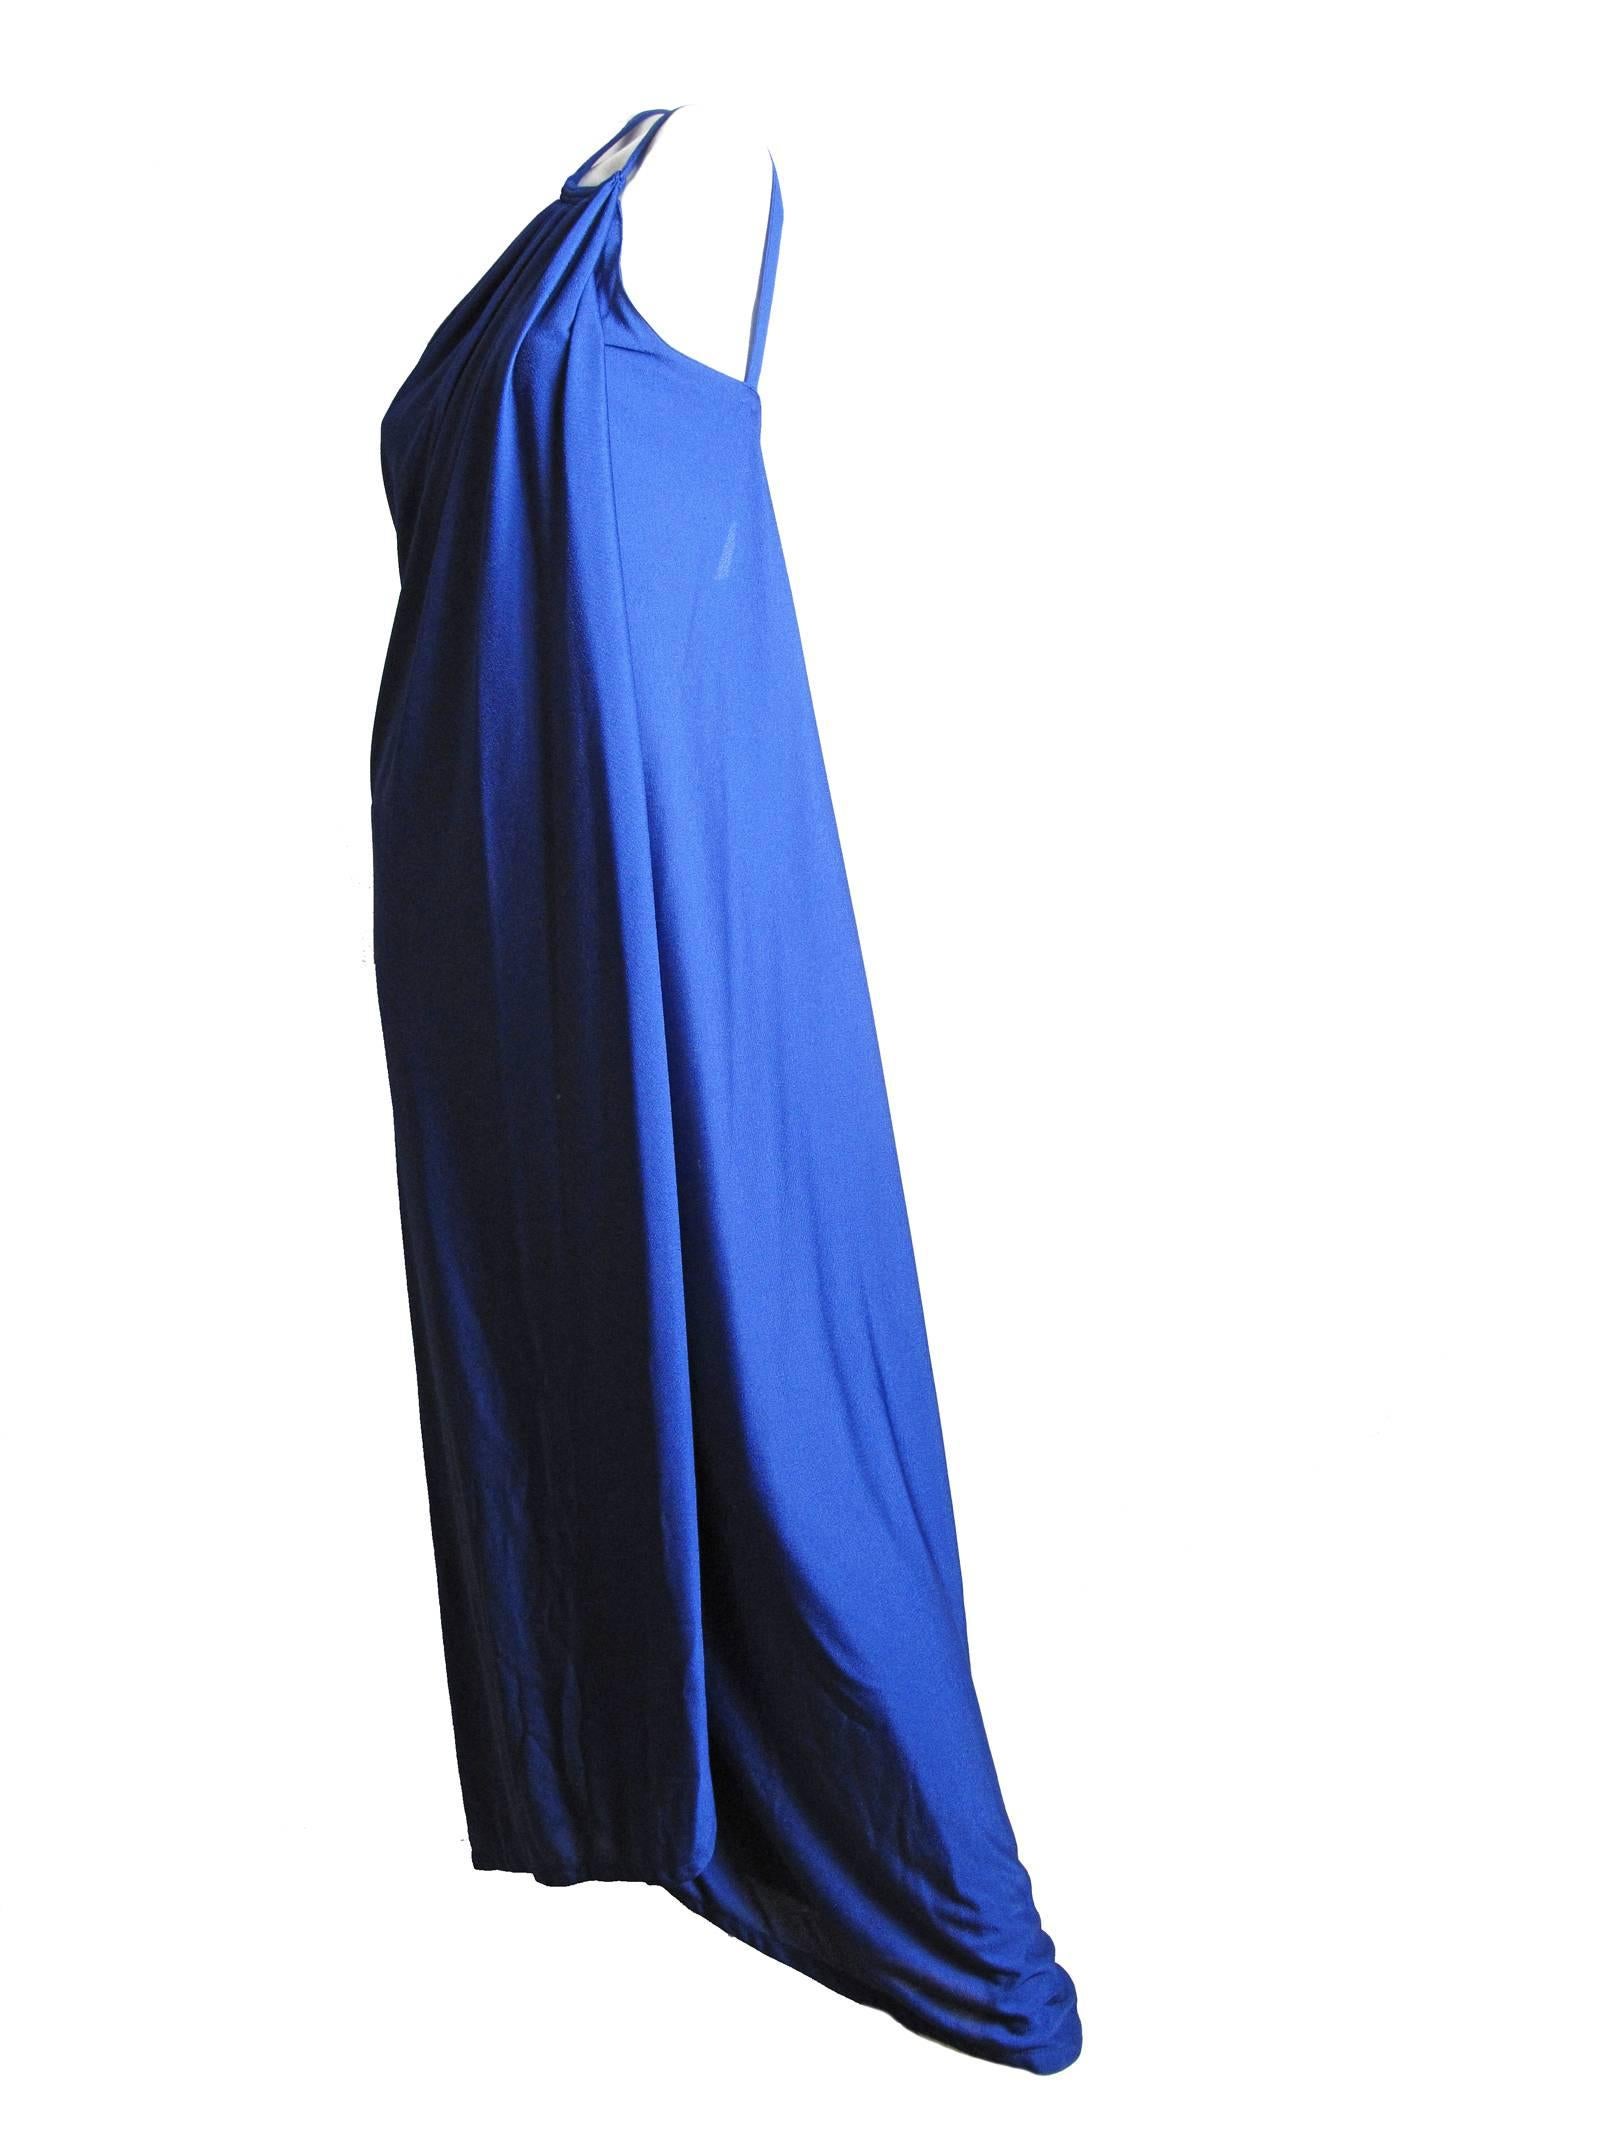 Adele Simpson blue gown with one shoulder.  Fabric has stretch.  Condition: Excellent. Size 12 or current US 10 - 12

We accept returns for refund, please see our terms.  We offer free Ground Shipping within the US.  Please let us know if you have